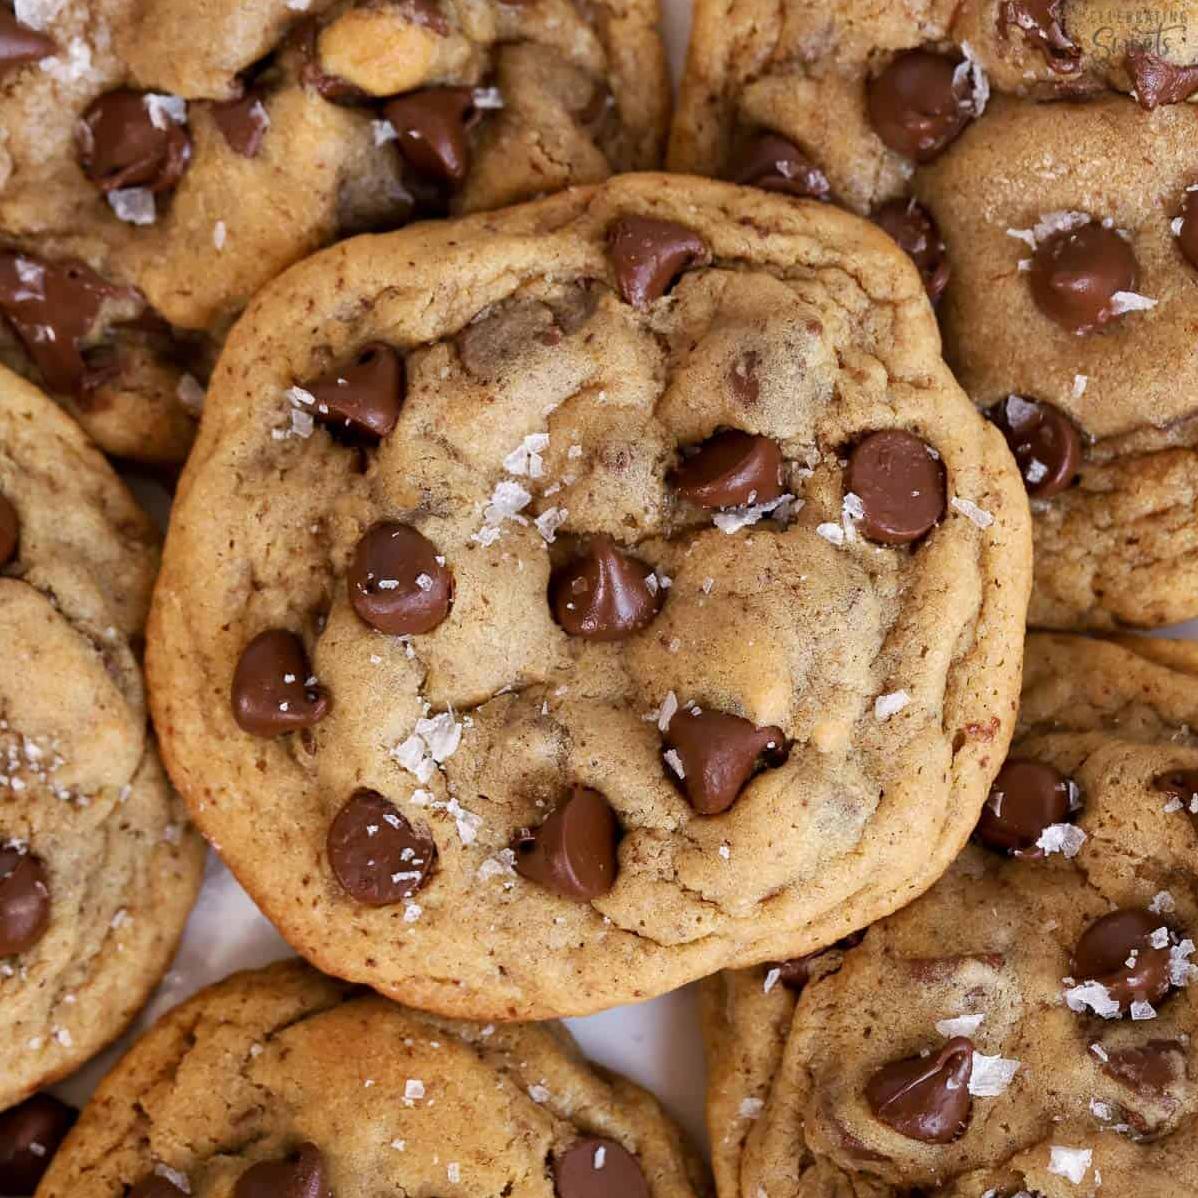  Combine the rich aroma of espresso with the sweet and classic taste of chocolate chips.